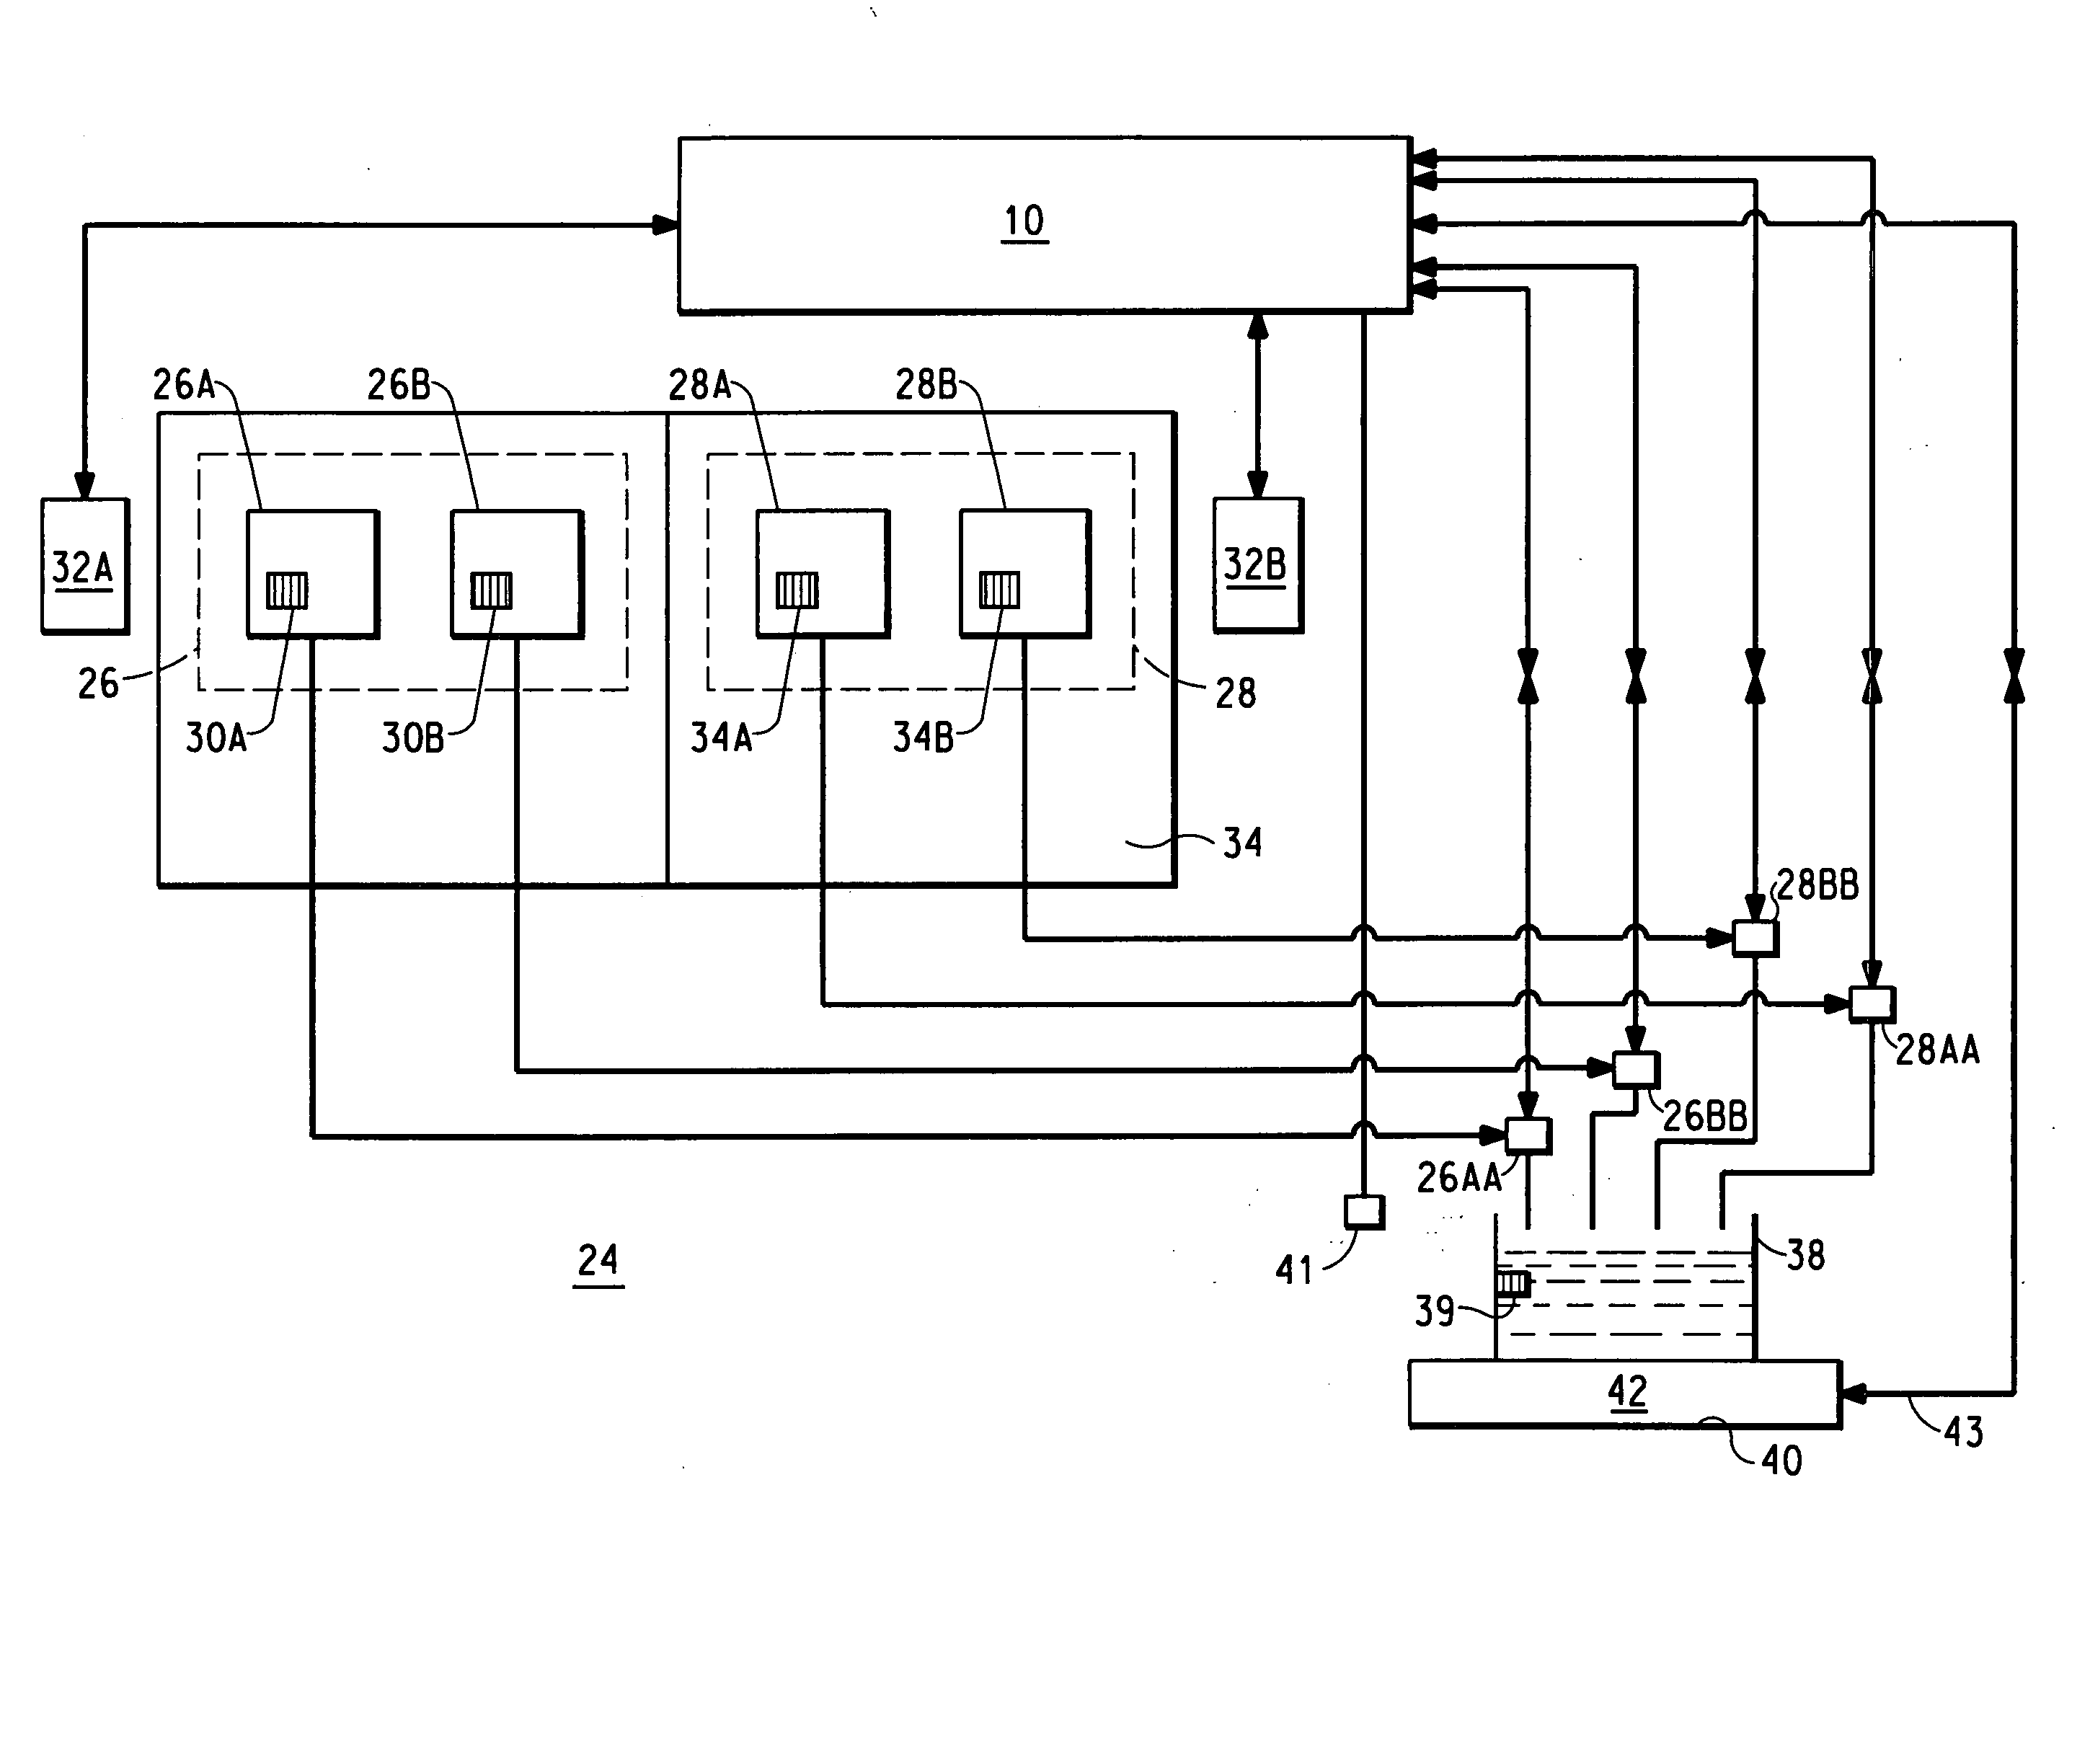 Process for monitoring production of compositions